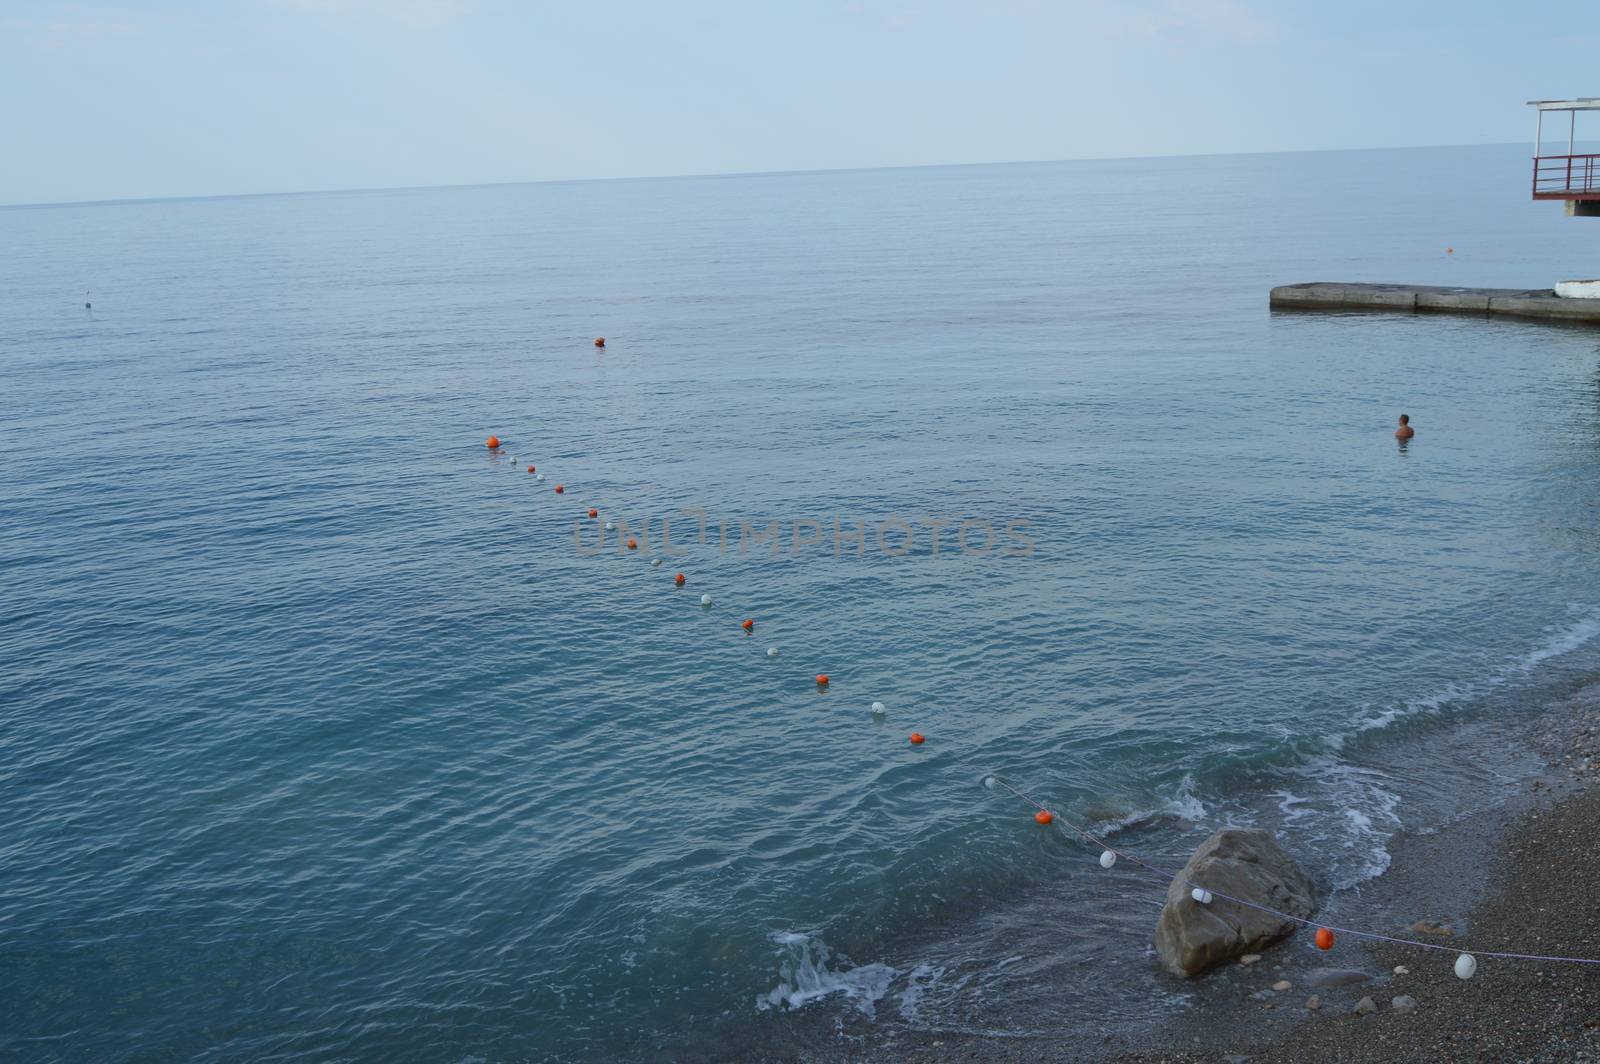 Separation buoys in the sea for safe swimming on the beach by claire_lucia